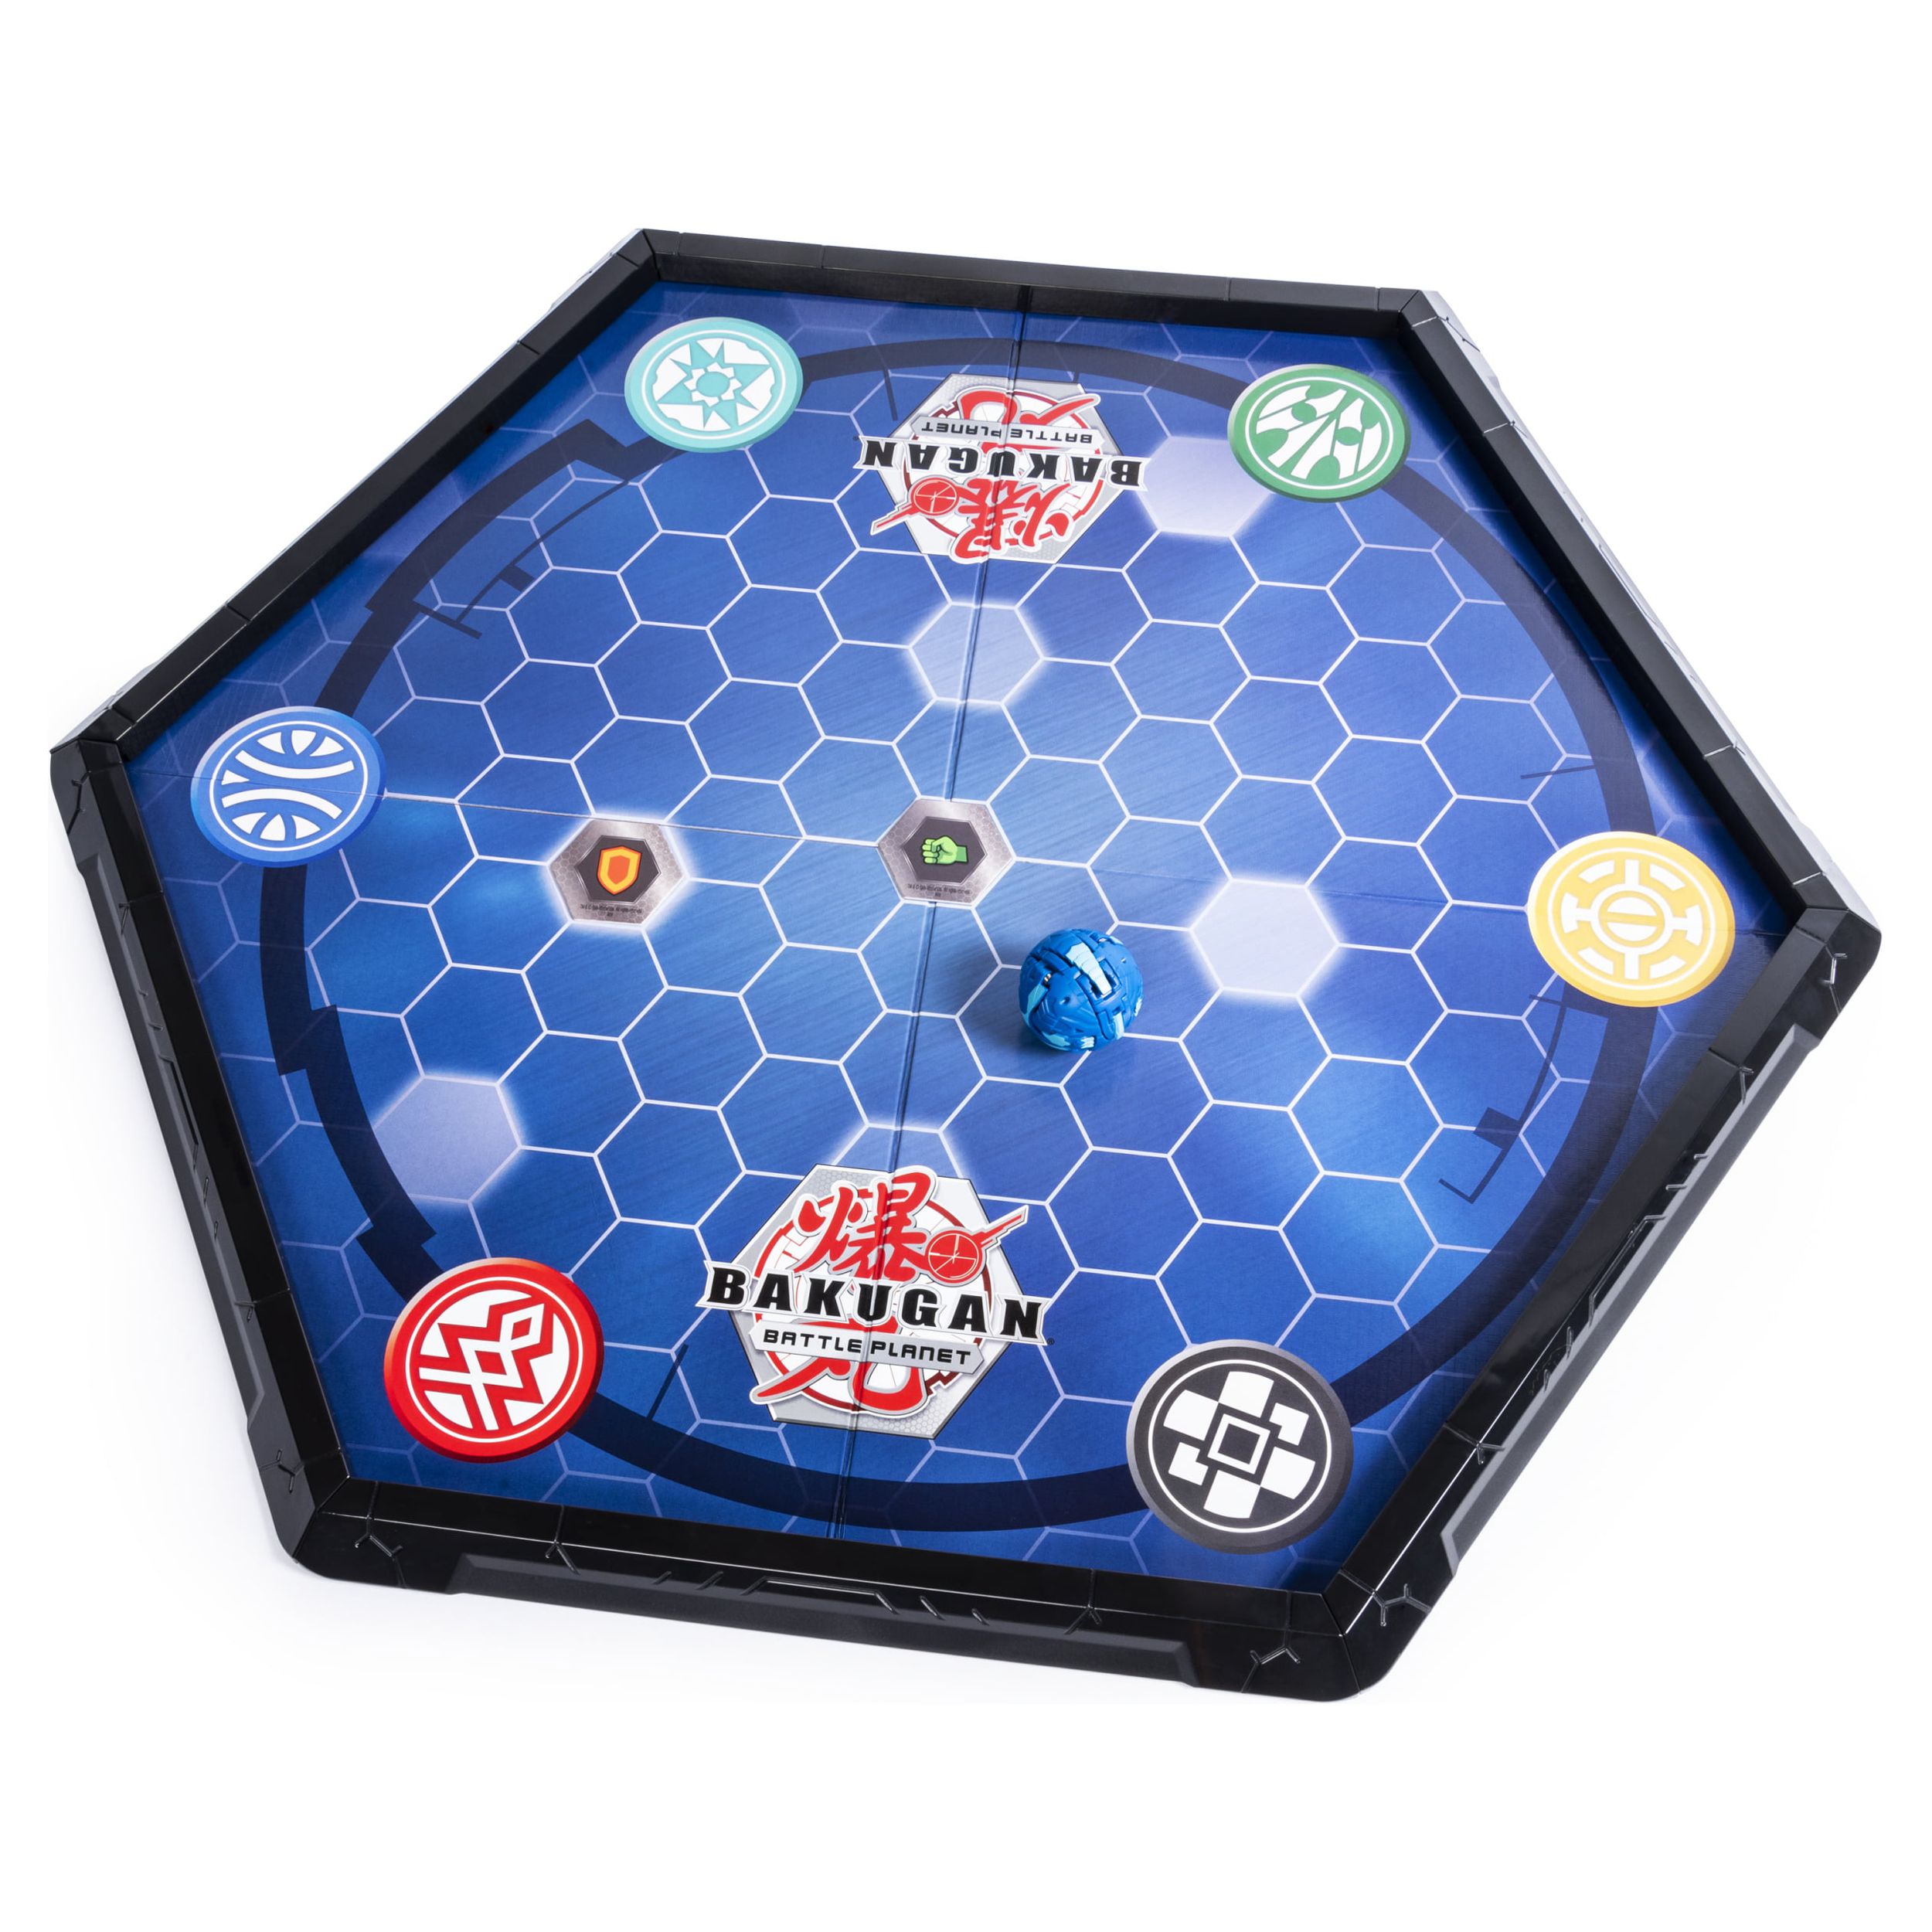 Bakugan Battle Arena, Game Board for Bakugan Collectibles, for Ages 6 and Up (Edition May Vary) - image 3 of 8